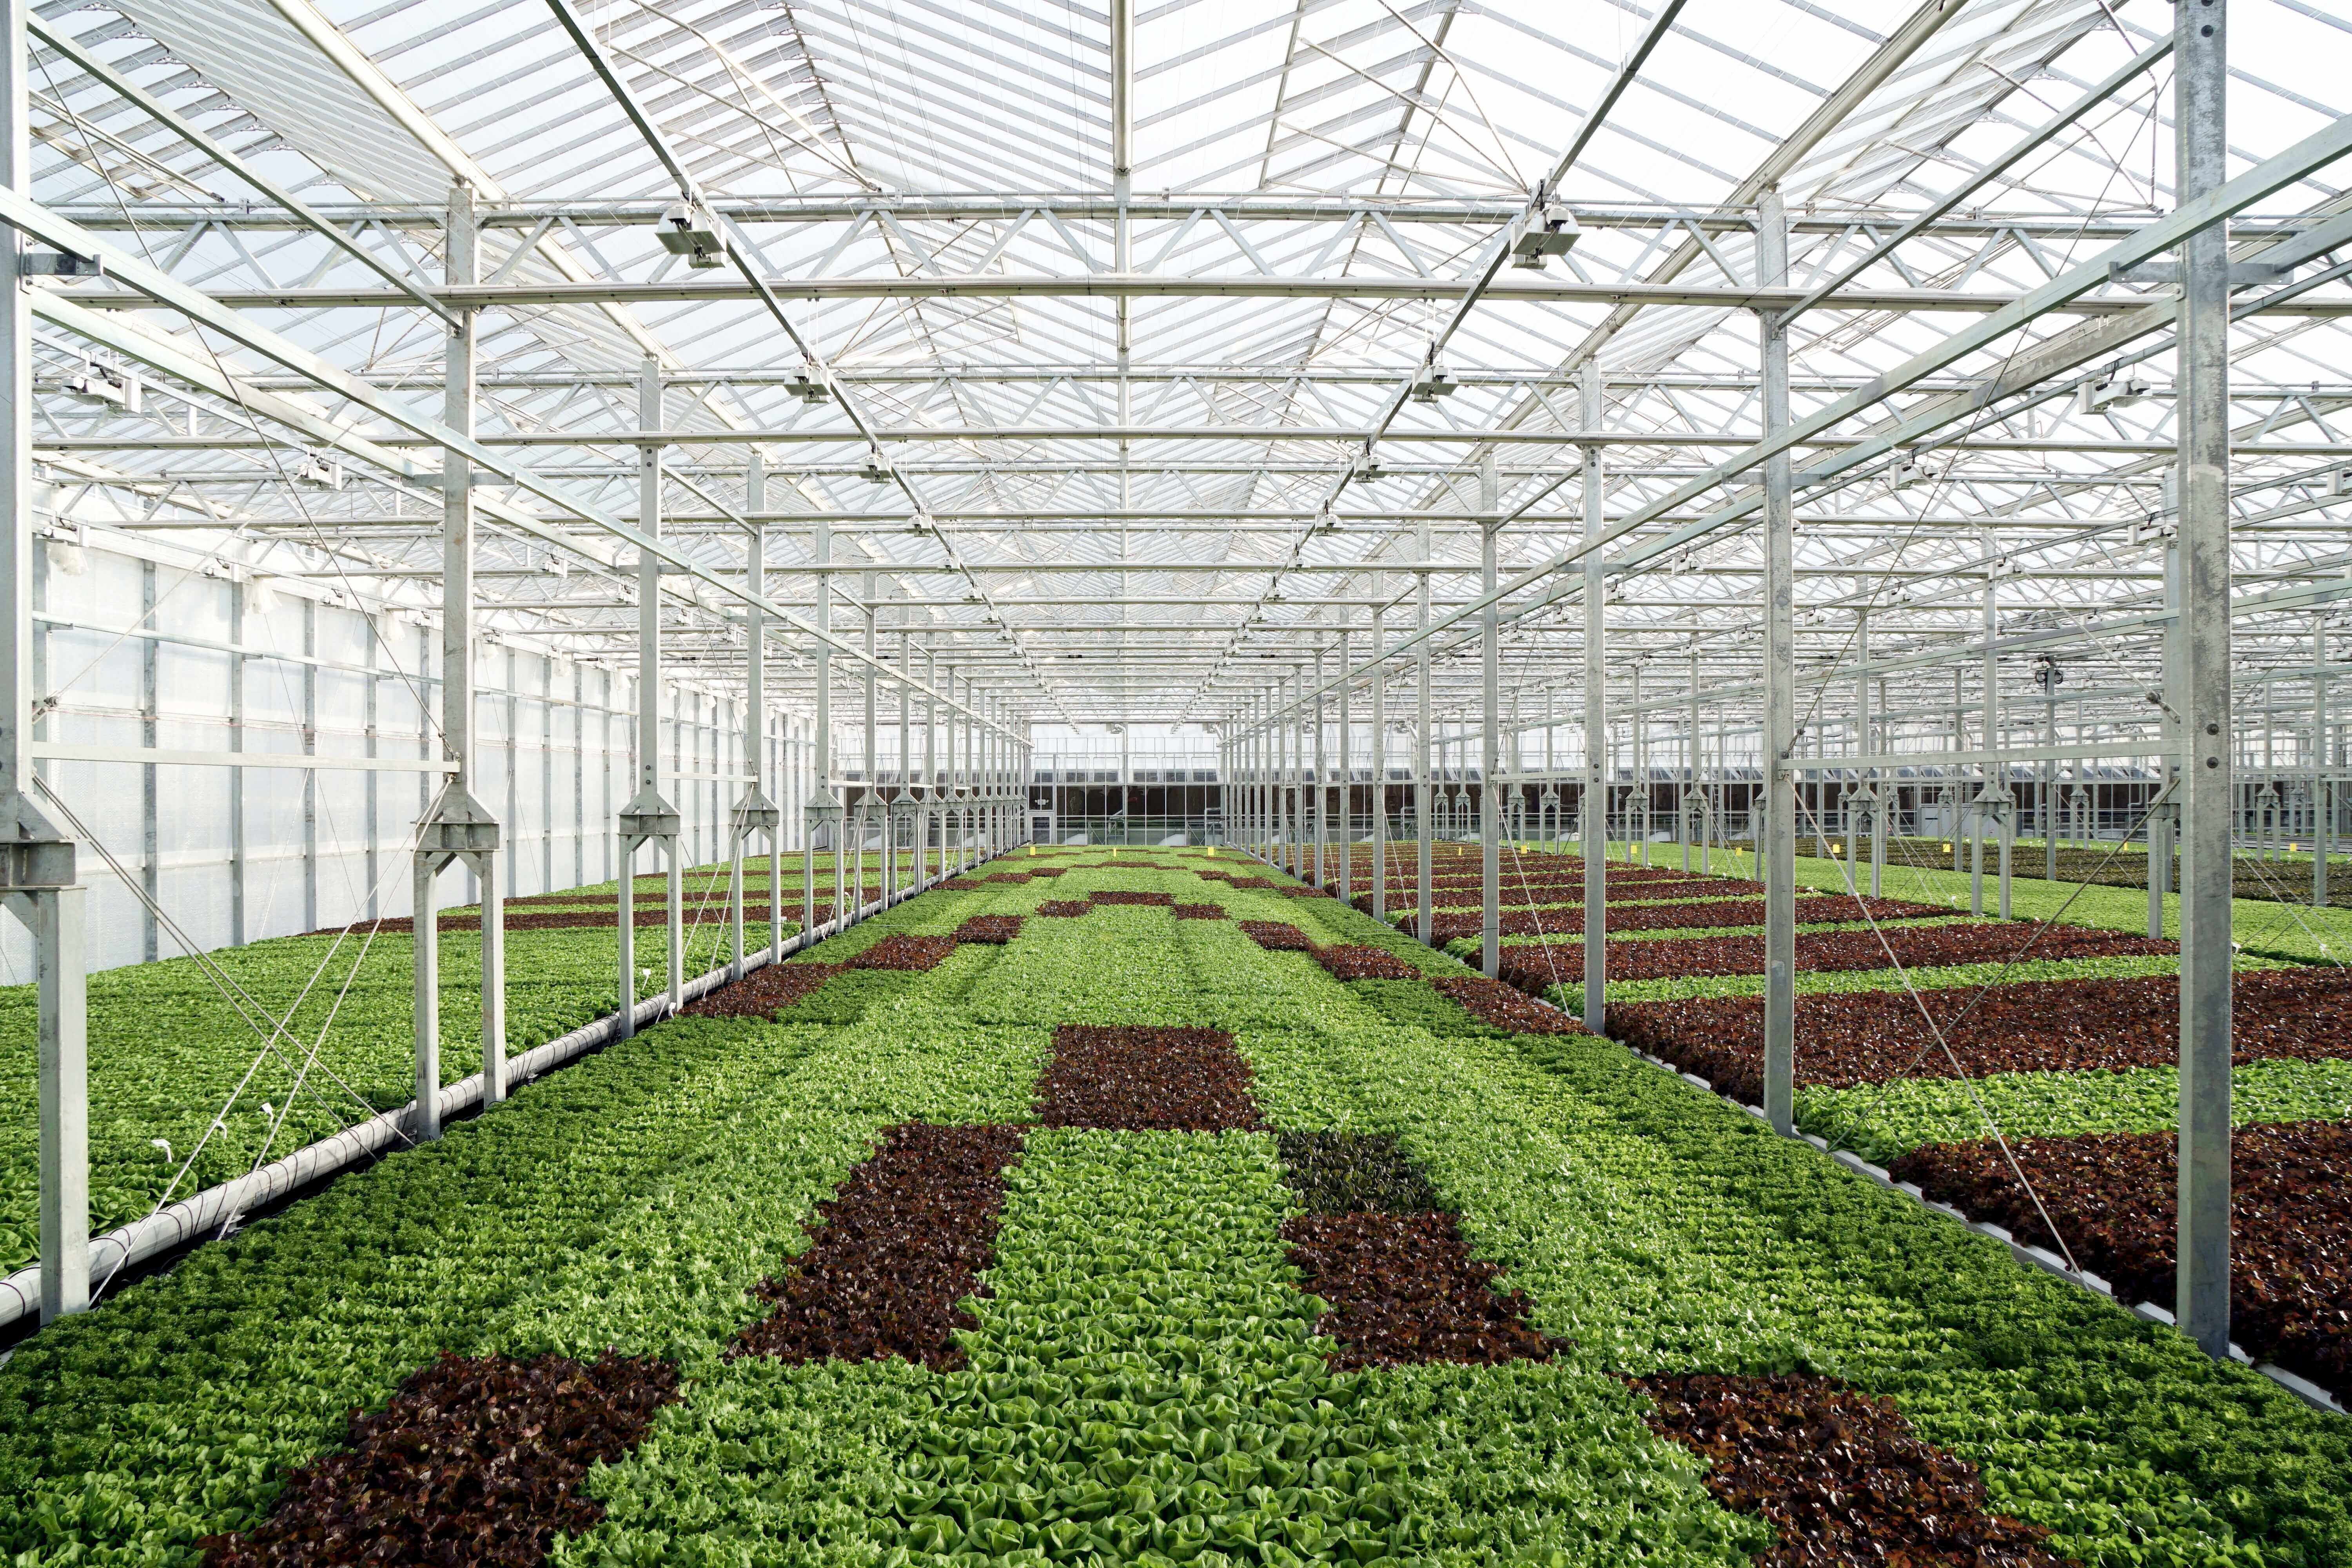 Sustainable Farming with Gotham Greens